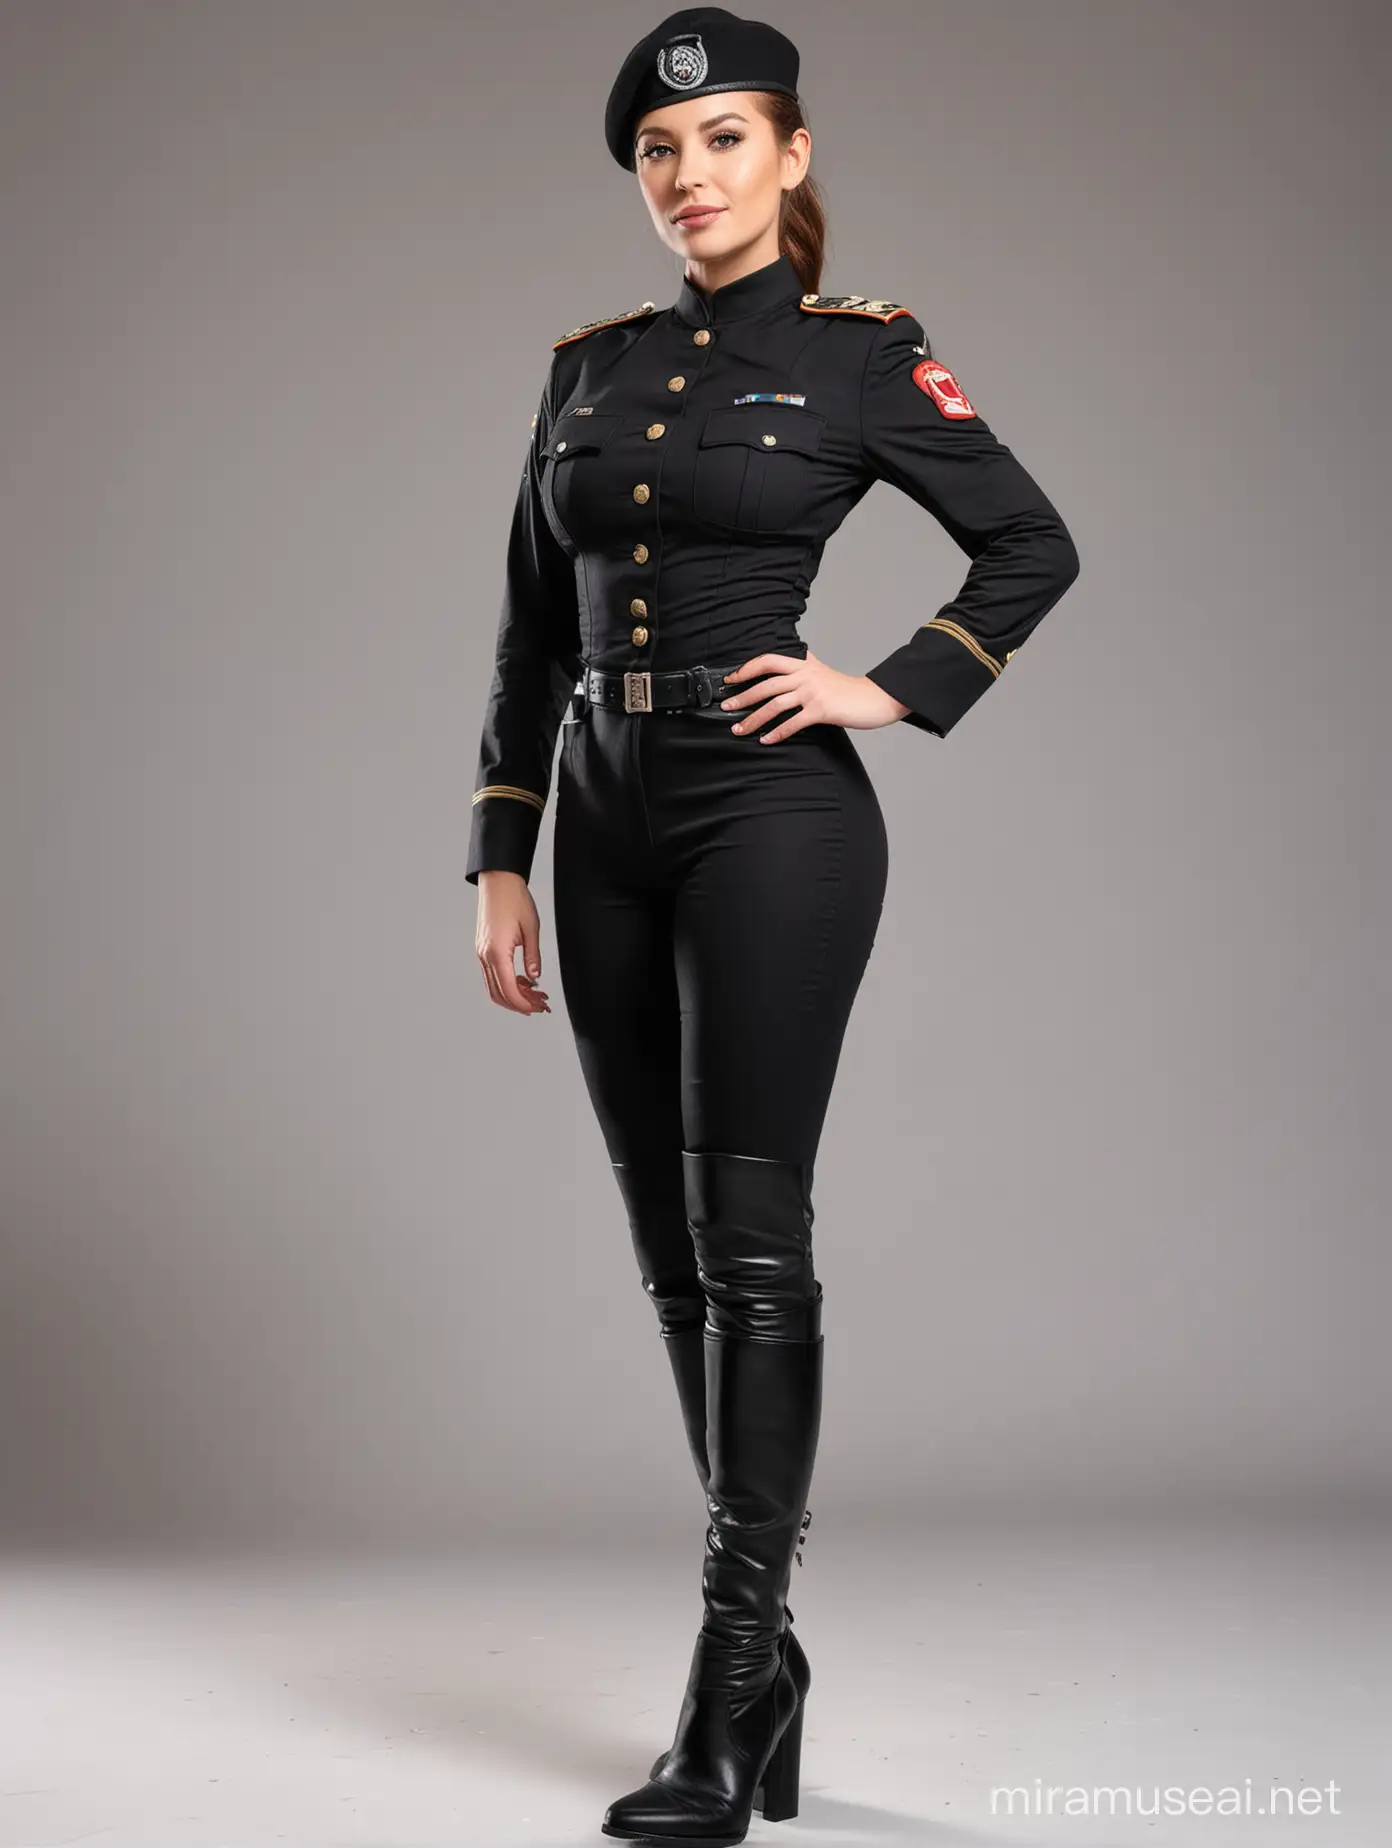 Confident Woman in Black Military Uniform with Long Boots